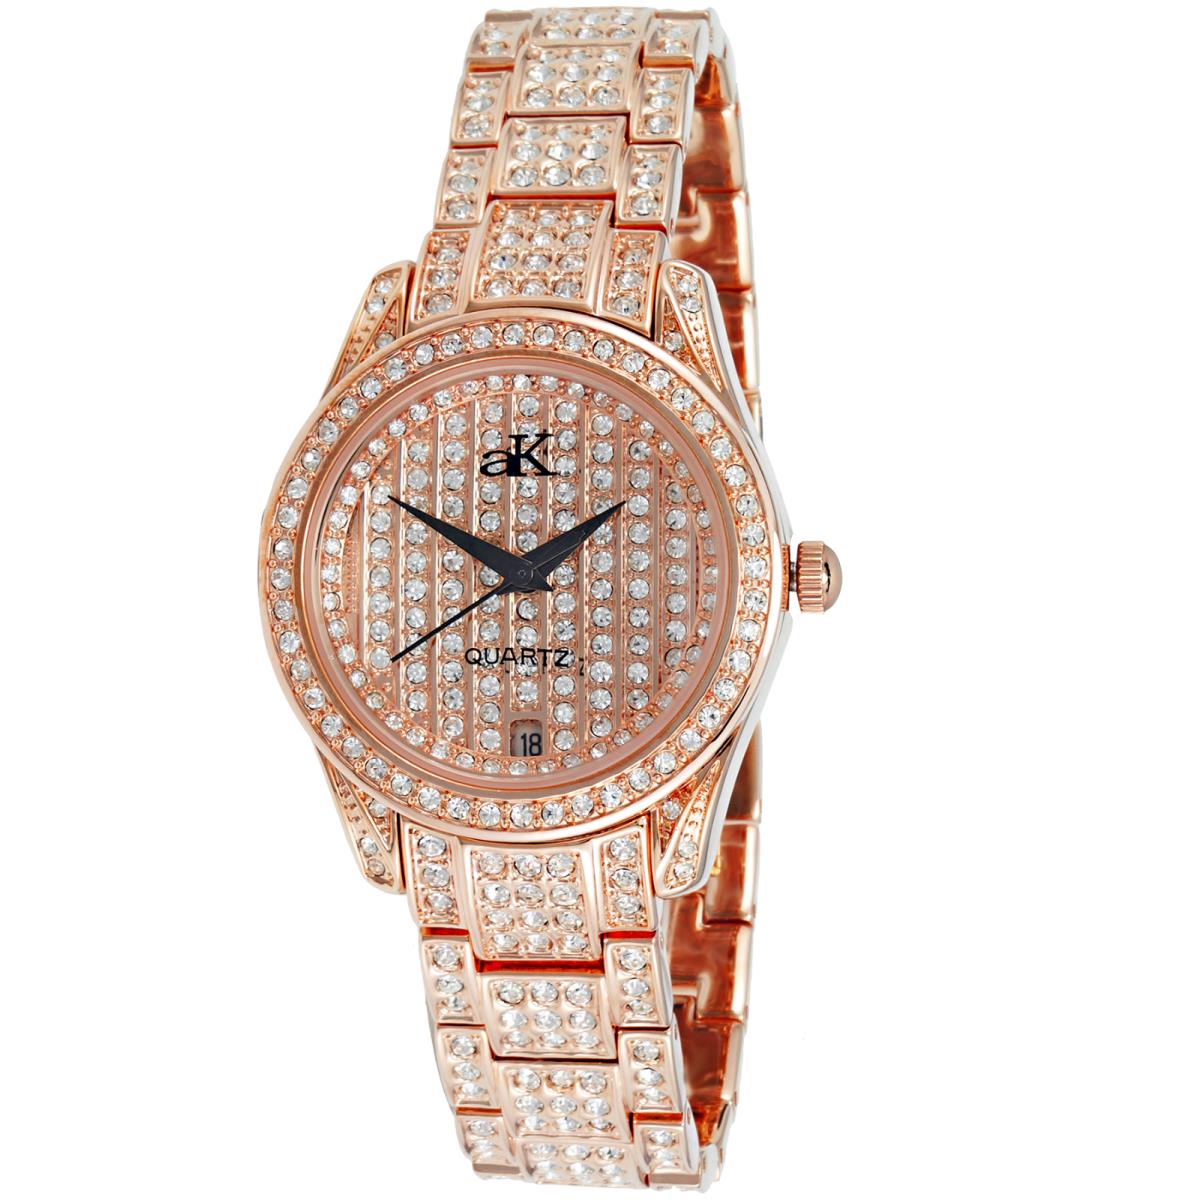 Adee Kaye Royalty Collection Crystal Adorned Watch Rose Gold